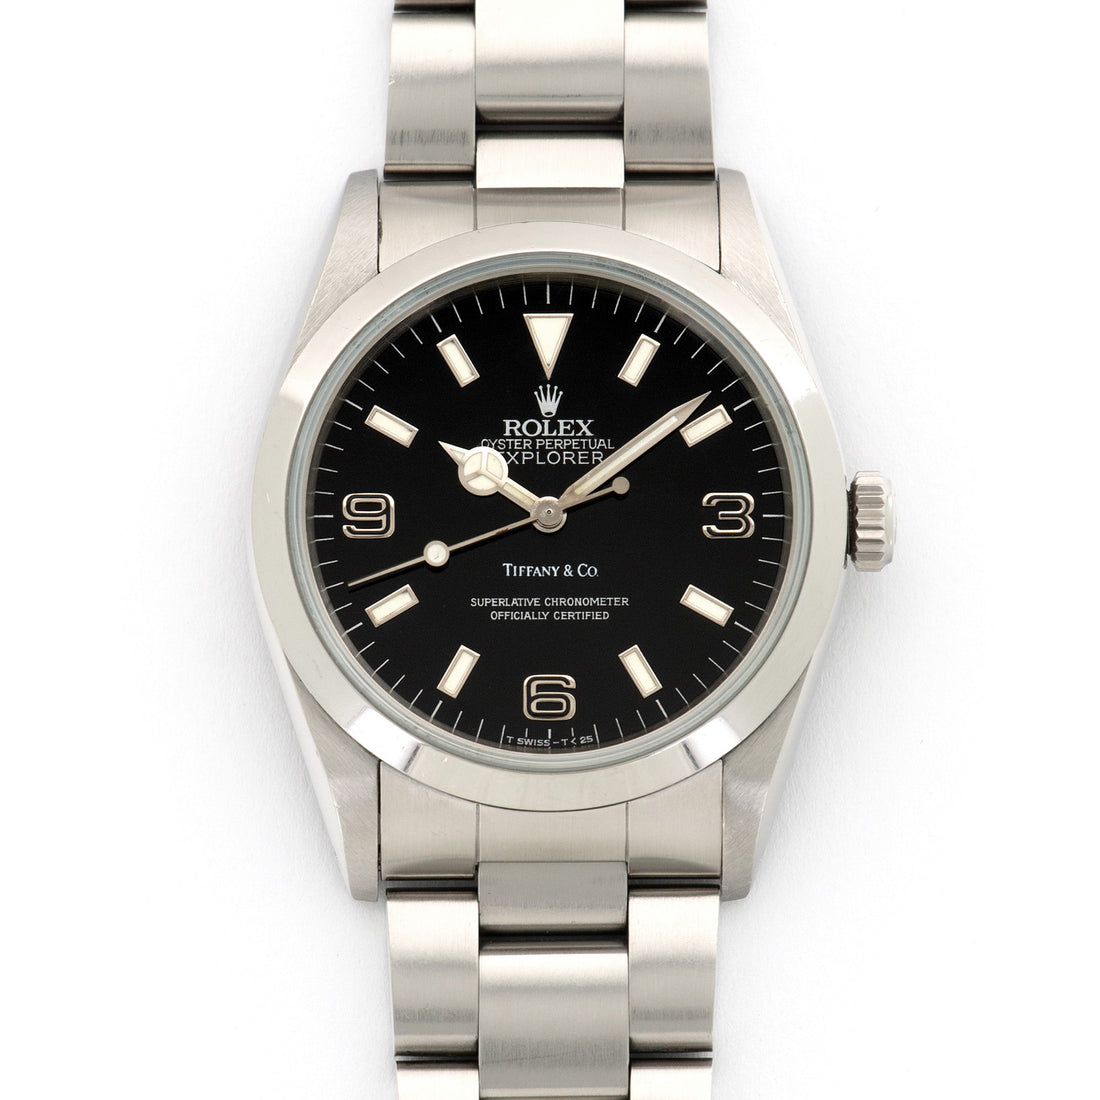 Rolex Explorer Black Out Watch, Ref. 14270 Retailed by Tiffany & Co.